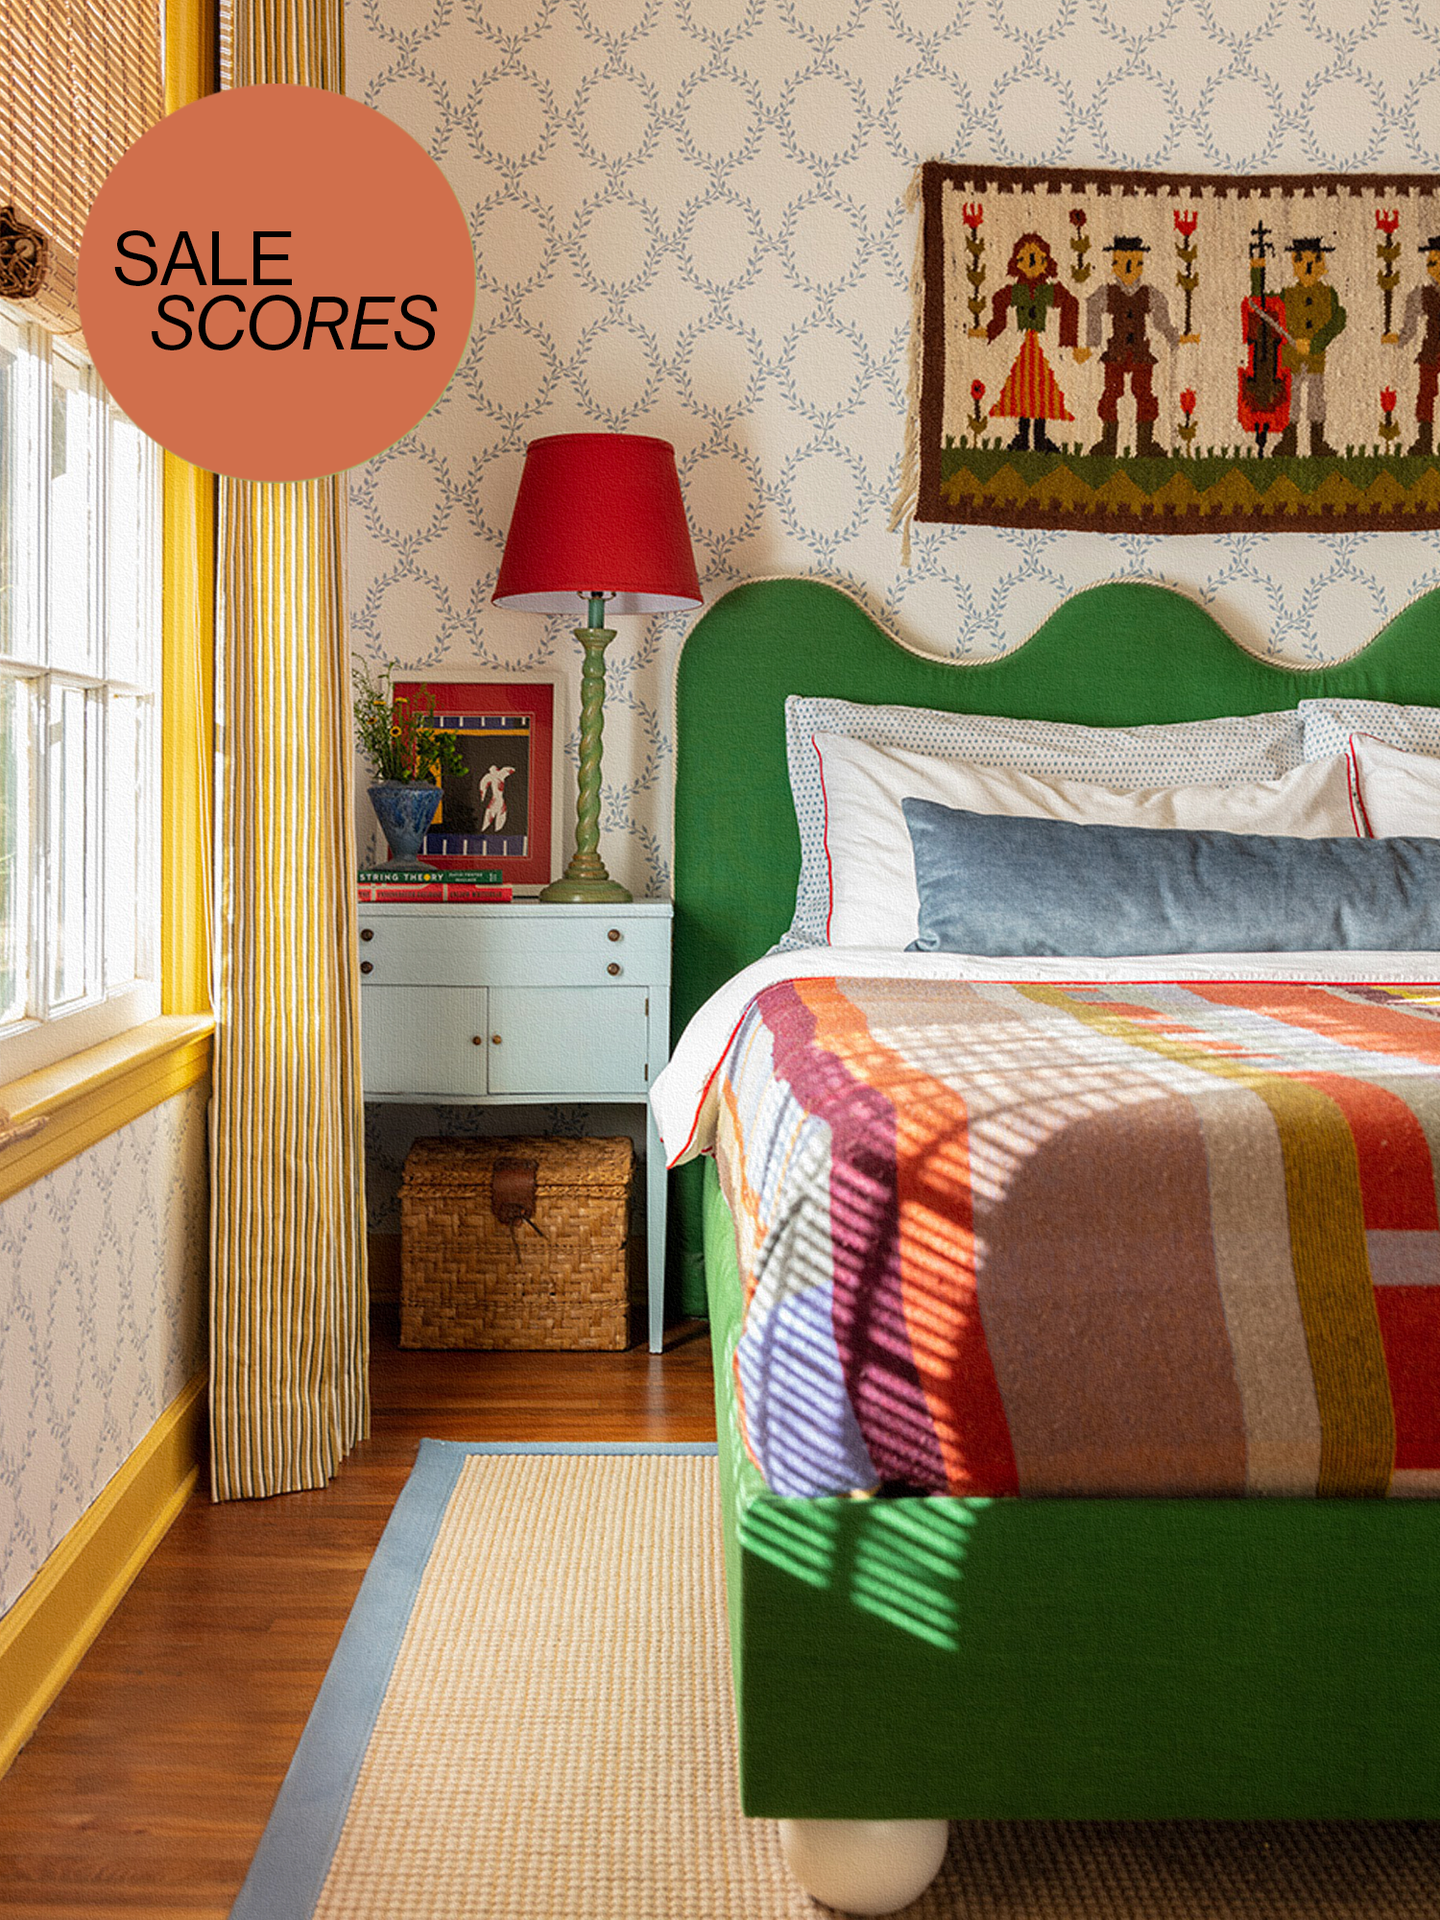 Colorful bedroom with green scalloped headboard and patterned quilt.